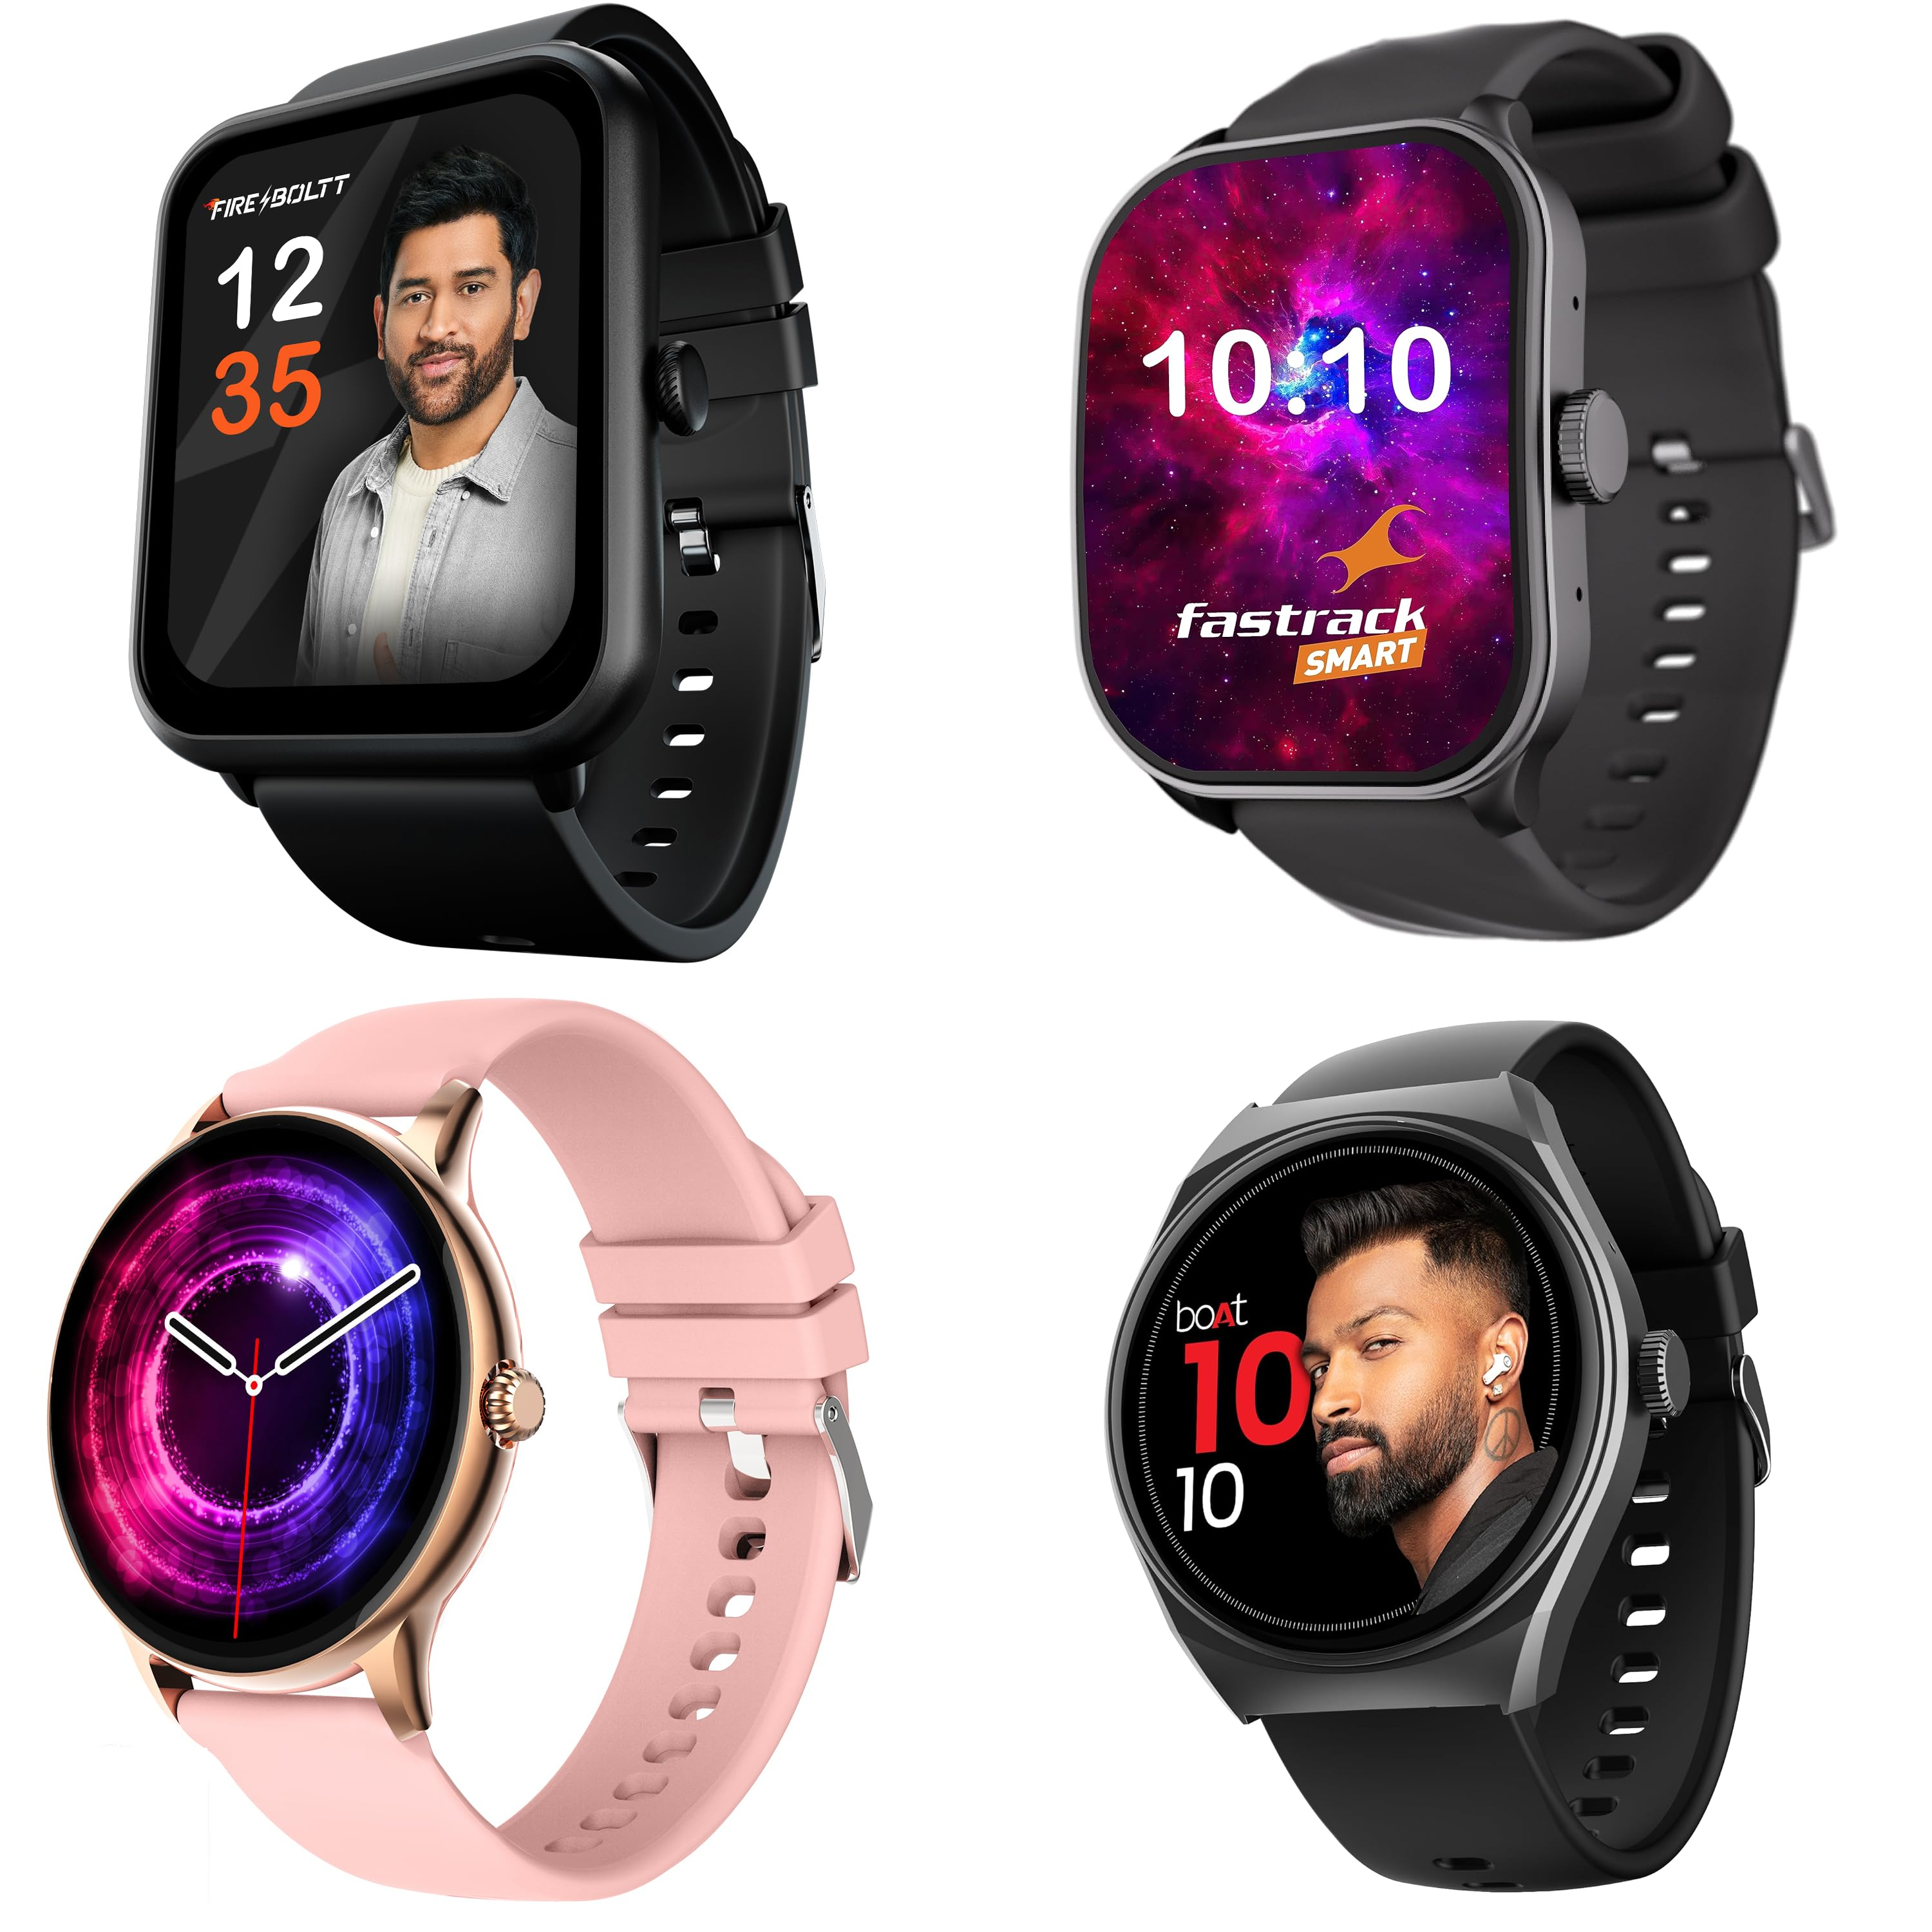 Best Smartwatches in india, Image Credit: Amazon